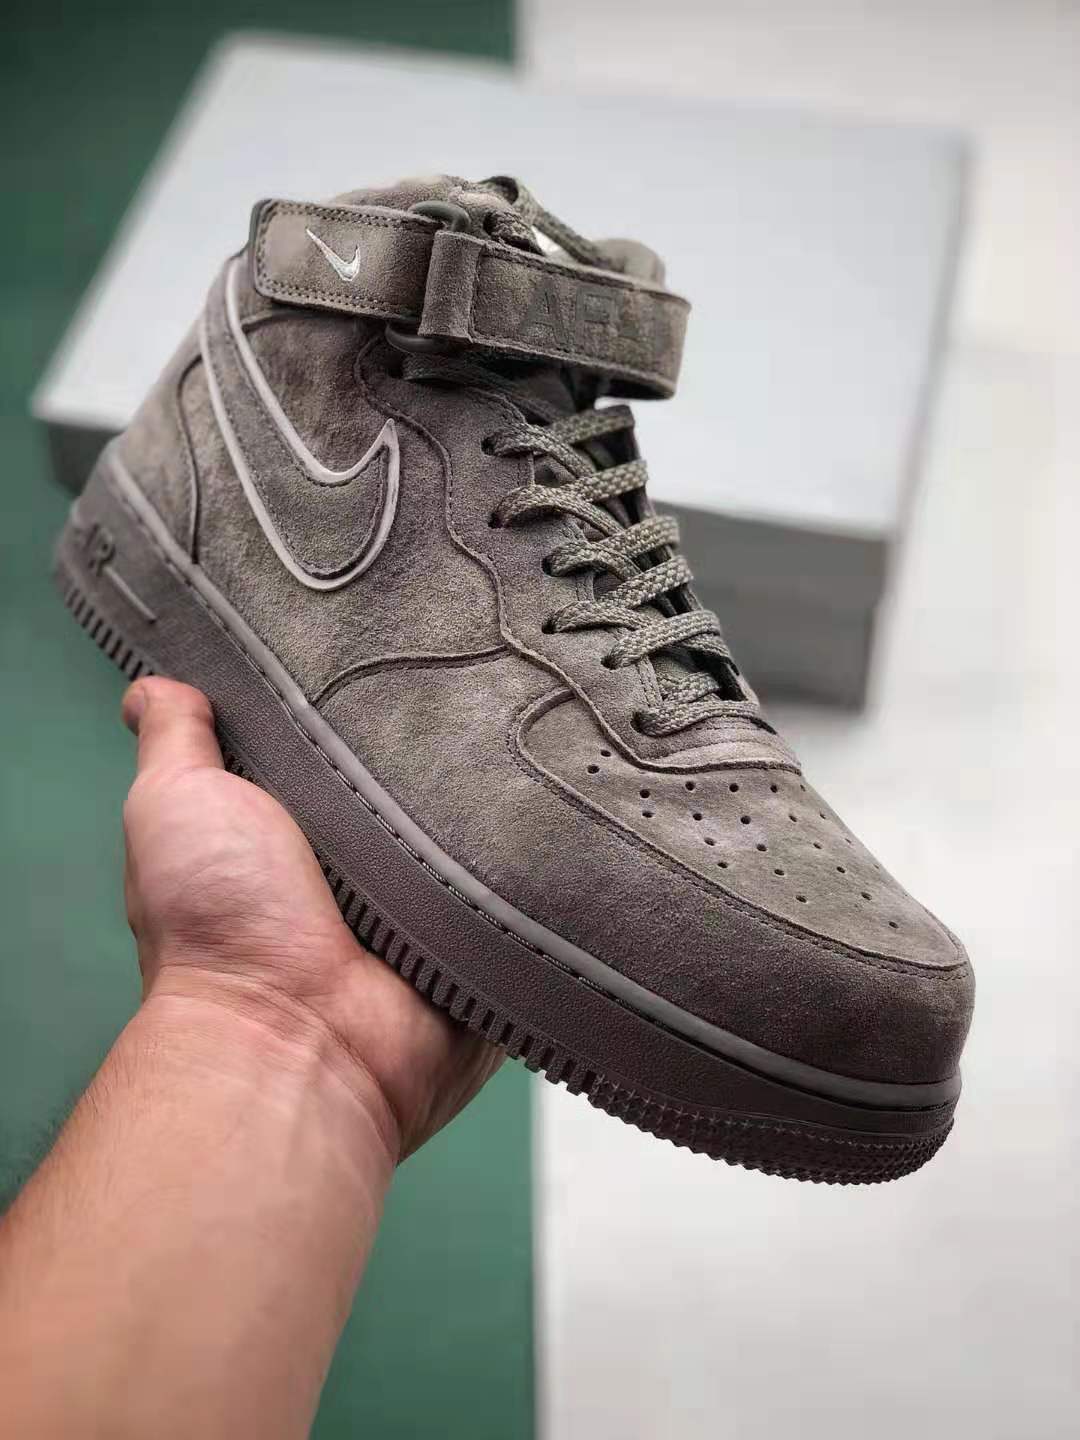 Nike Air Force 1 High '07 LV8 Suede 'Atmosphere Grey' AA1118-003 - Authentic Style in Trendy Shades